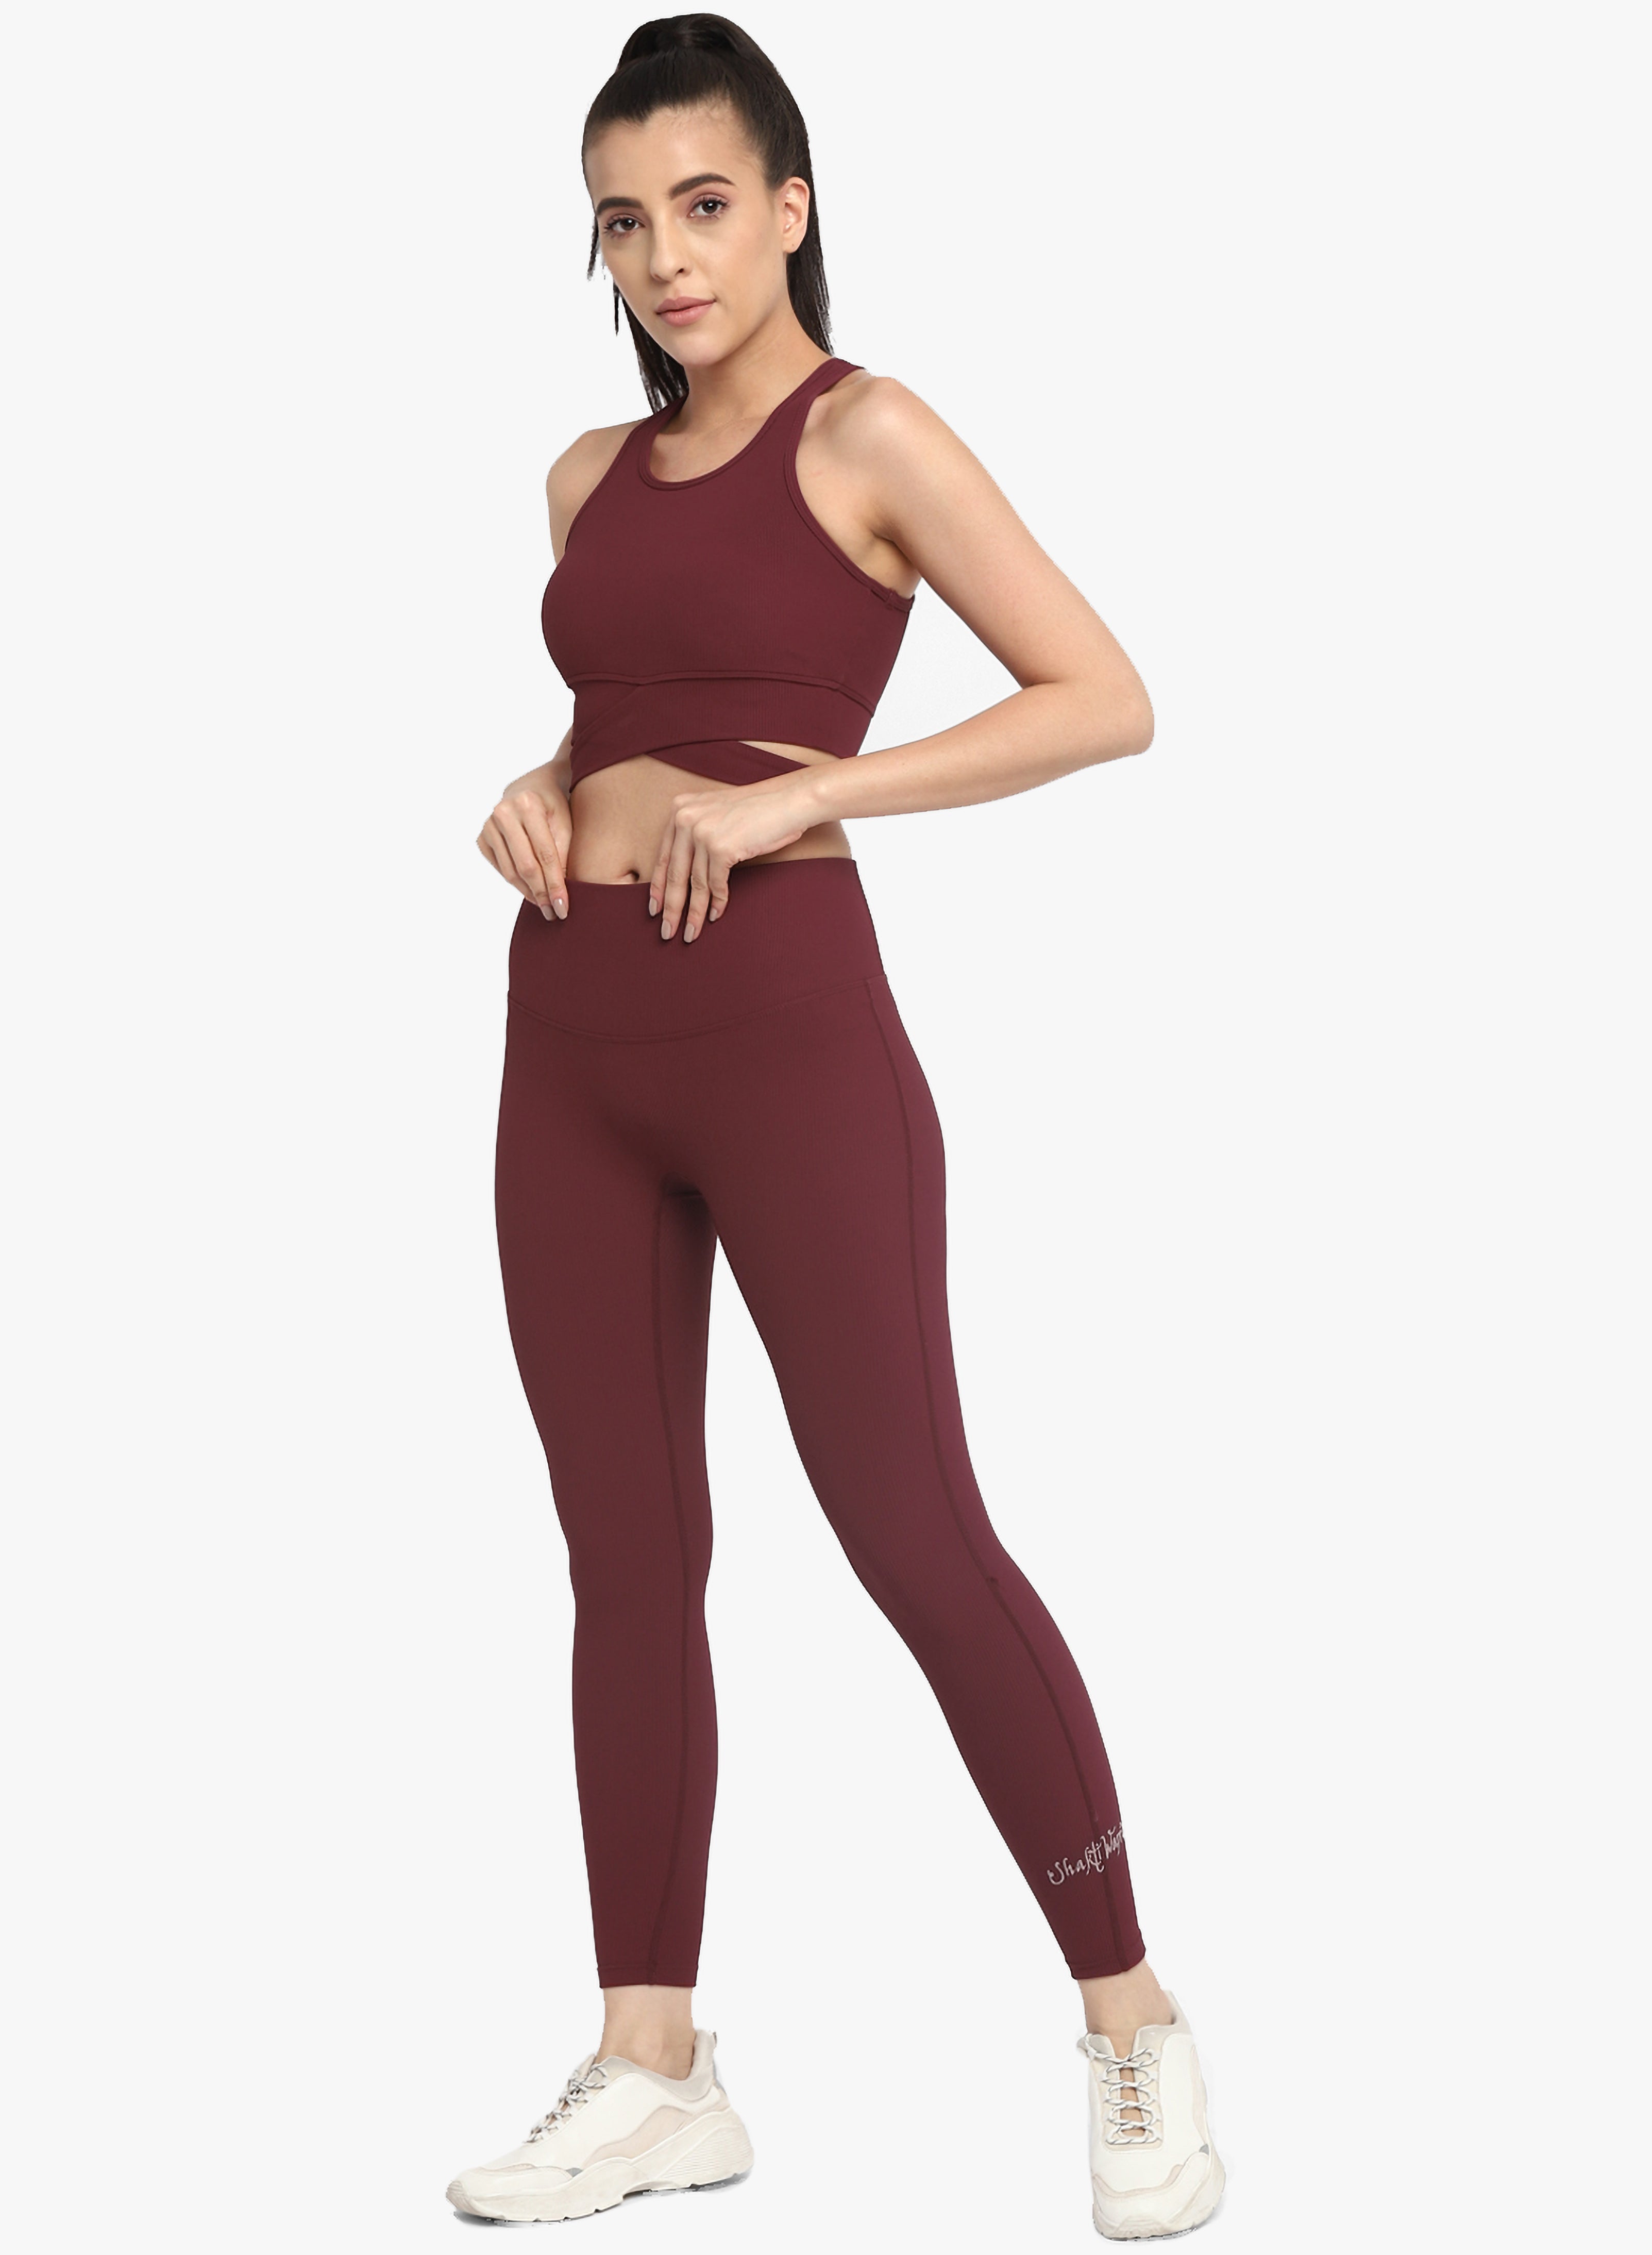 Buy Workout Sets for Women 5 PCS Inmarces Yoga Outfits